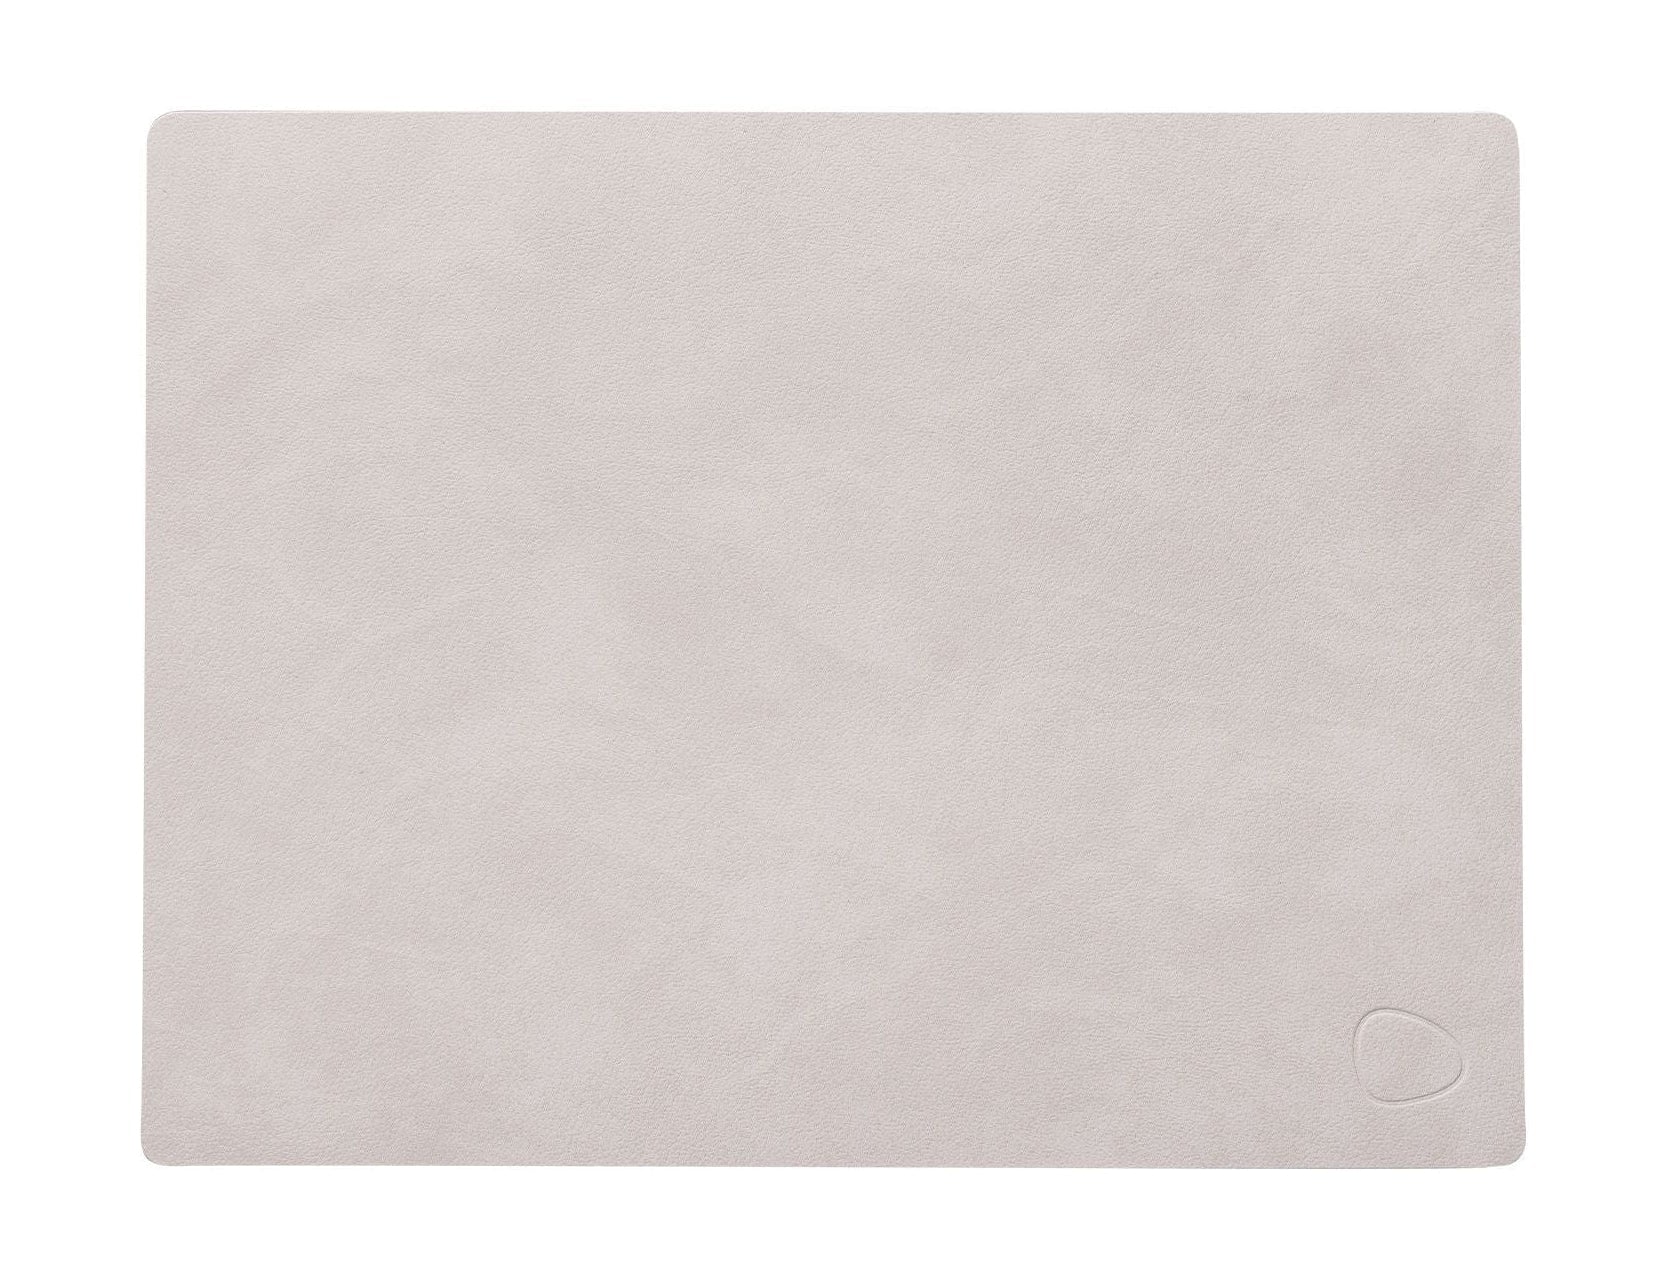 Lind DNA -bord vid Quare M, Oyster White